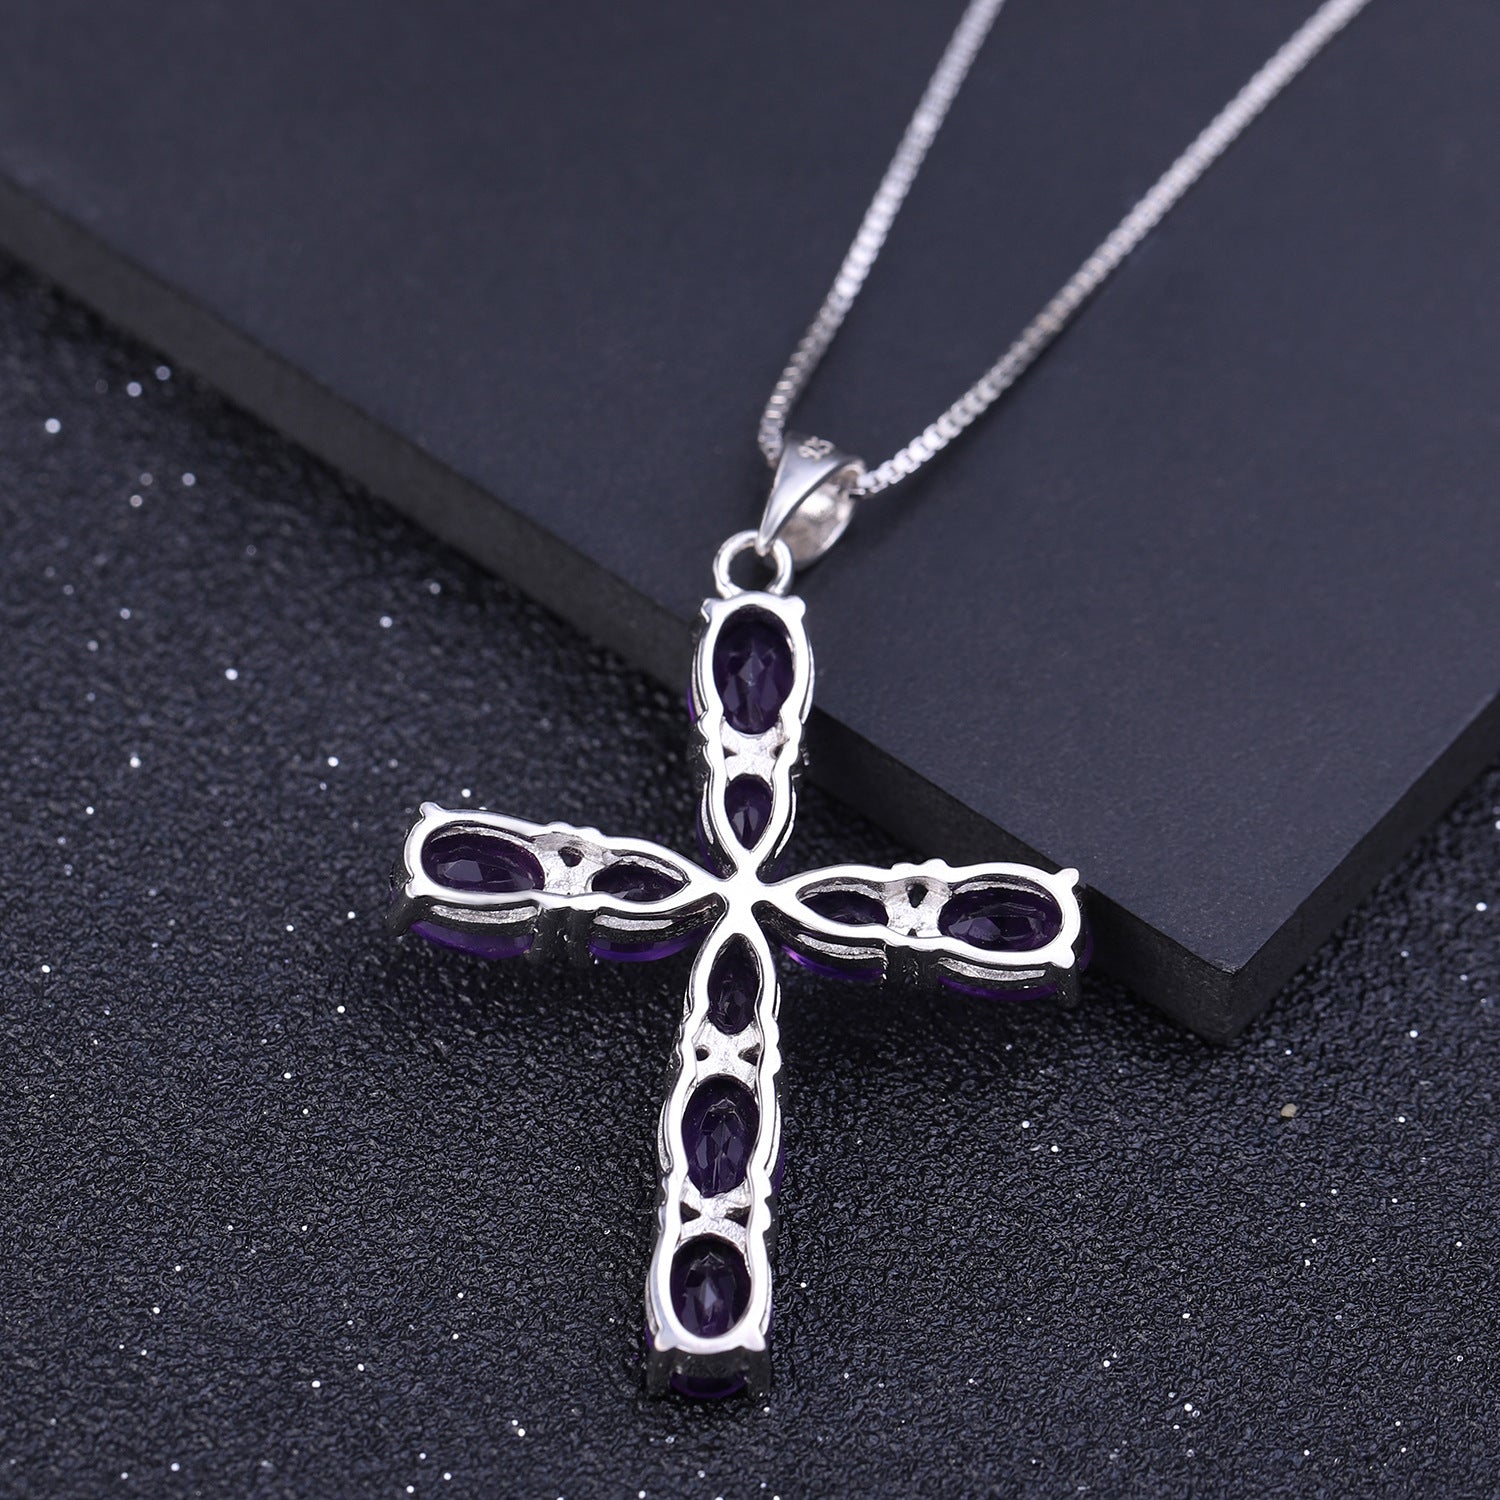 Europen Style Inlaid Natural Amethyst Cross Pendant Silver Necklace for Women